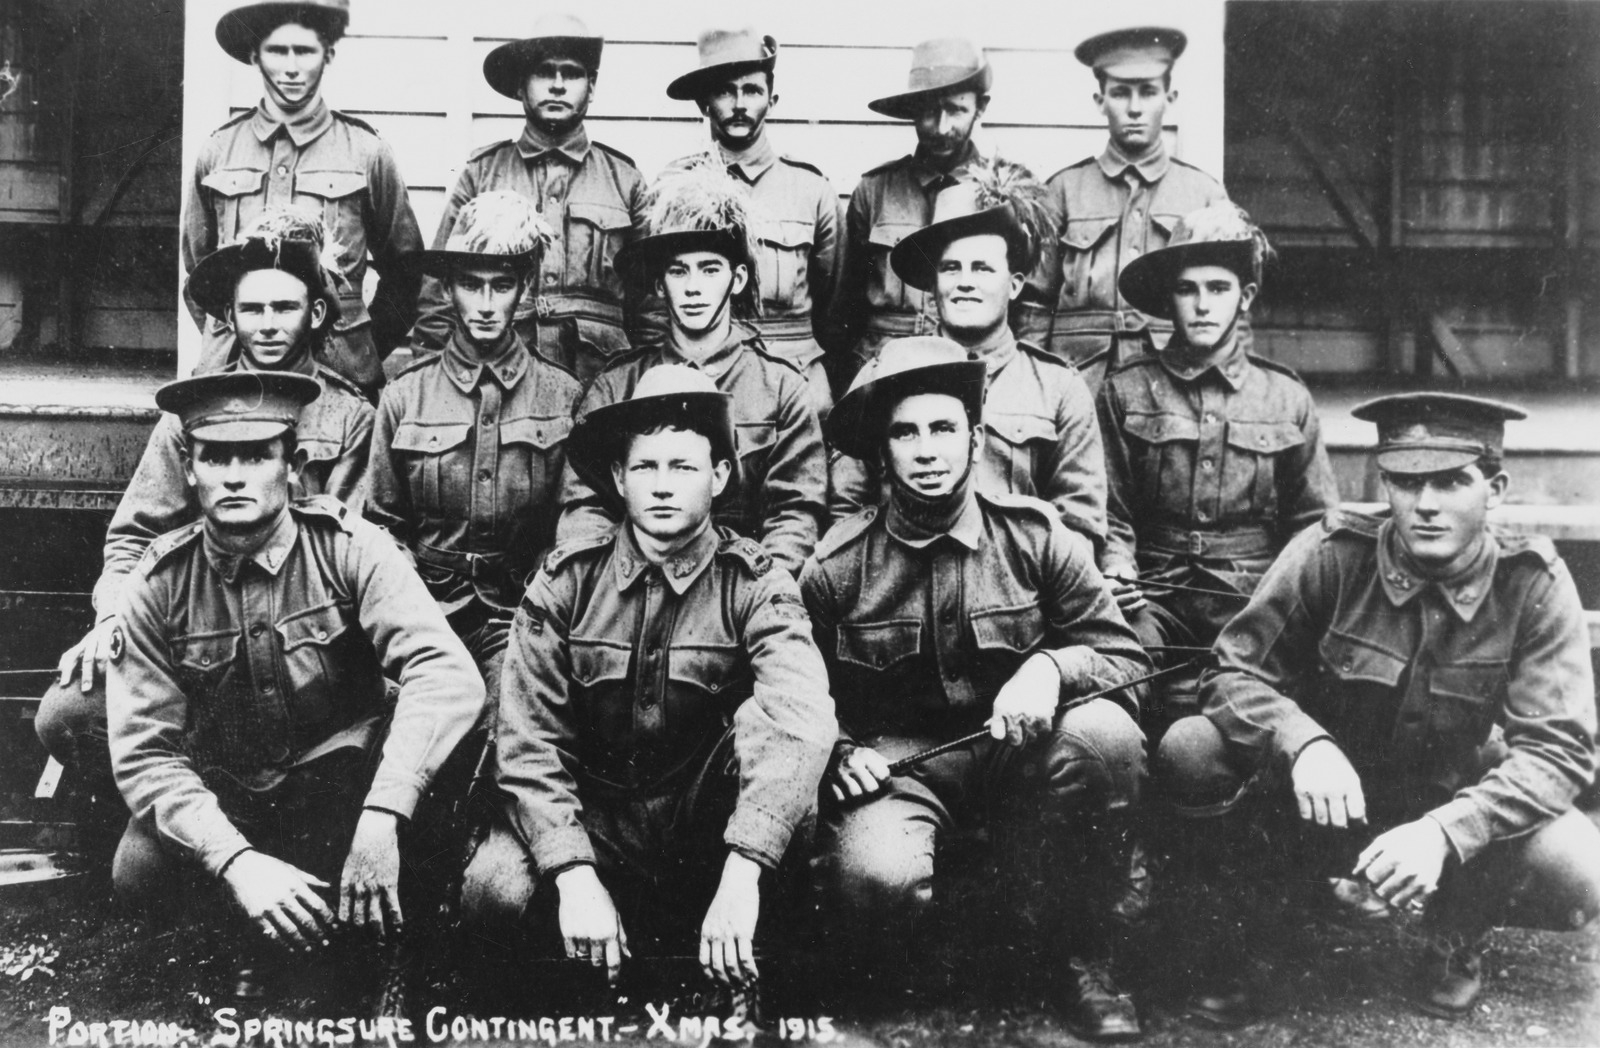  Soldiers and officers from the Springsure contingent of the Australian Imperial Force, Springsure, 1915